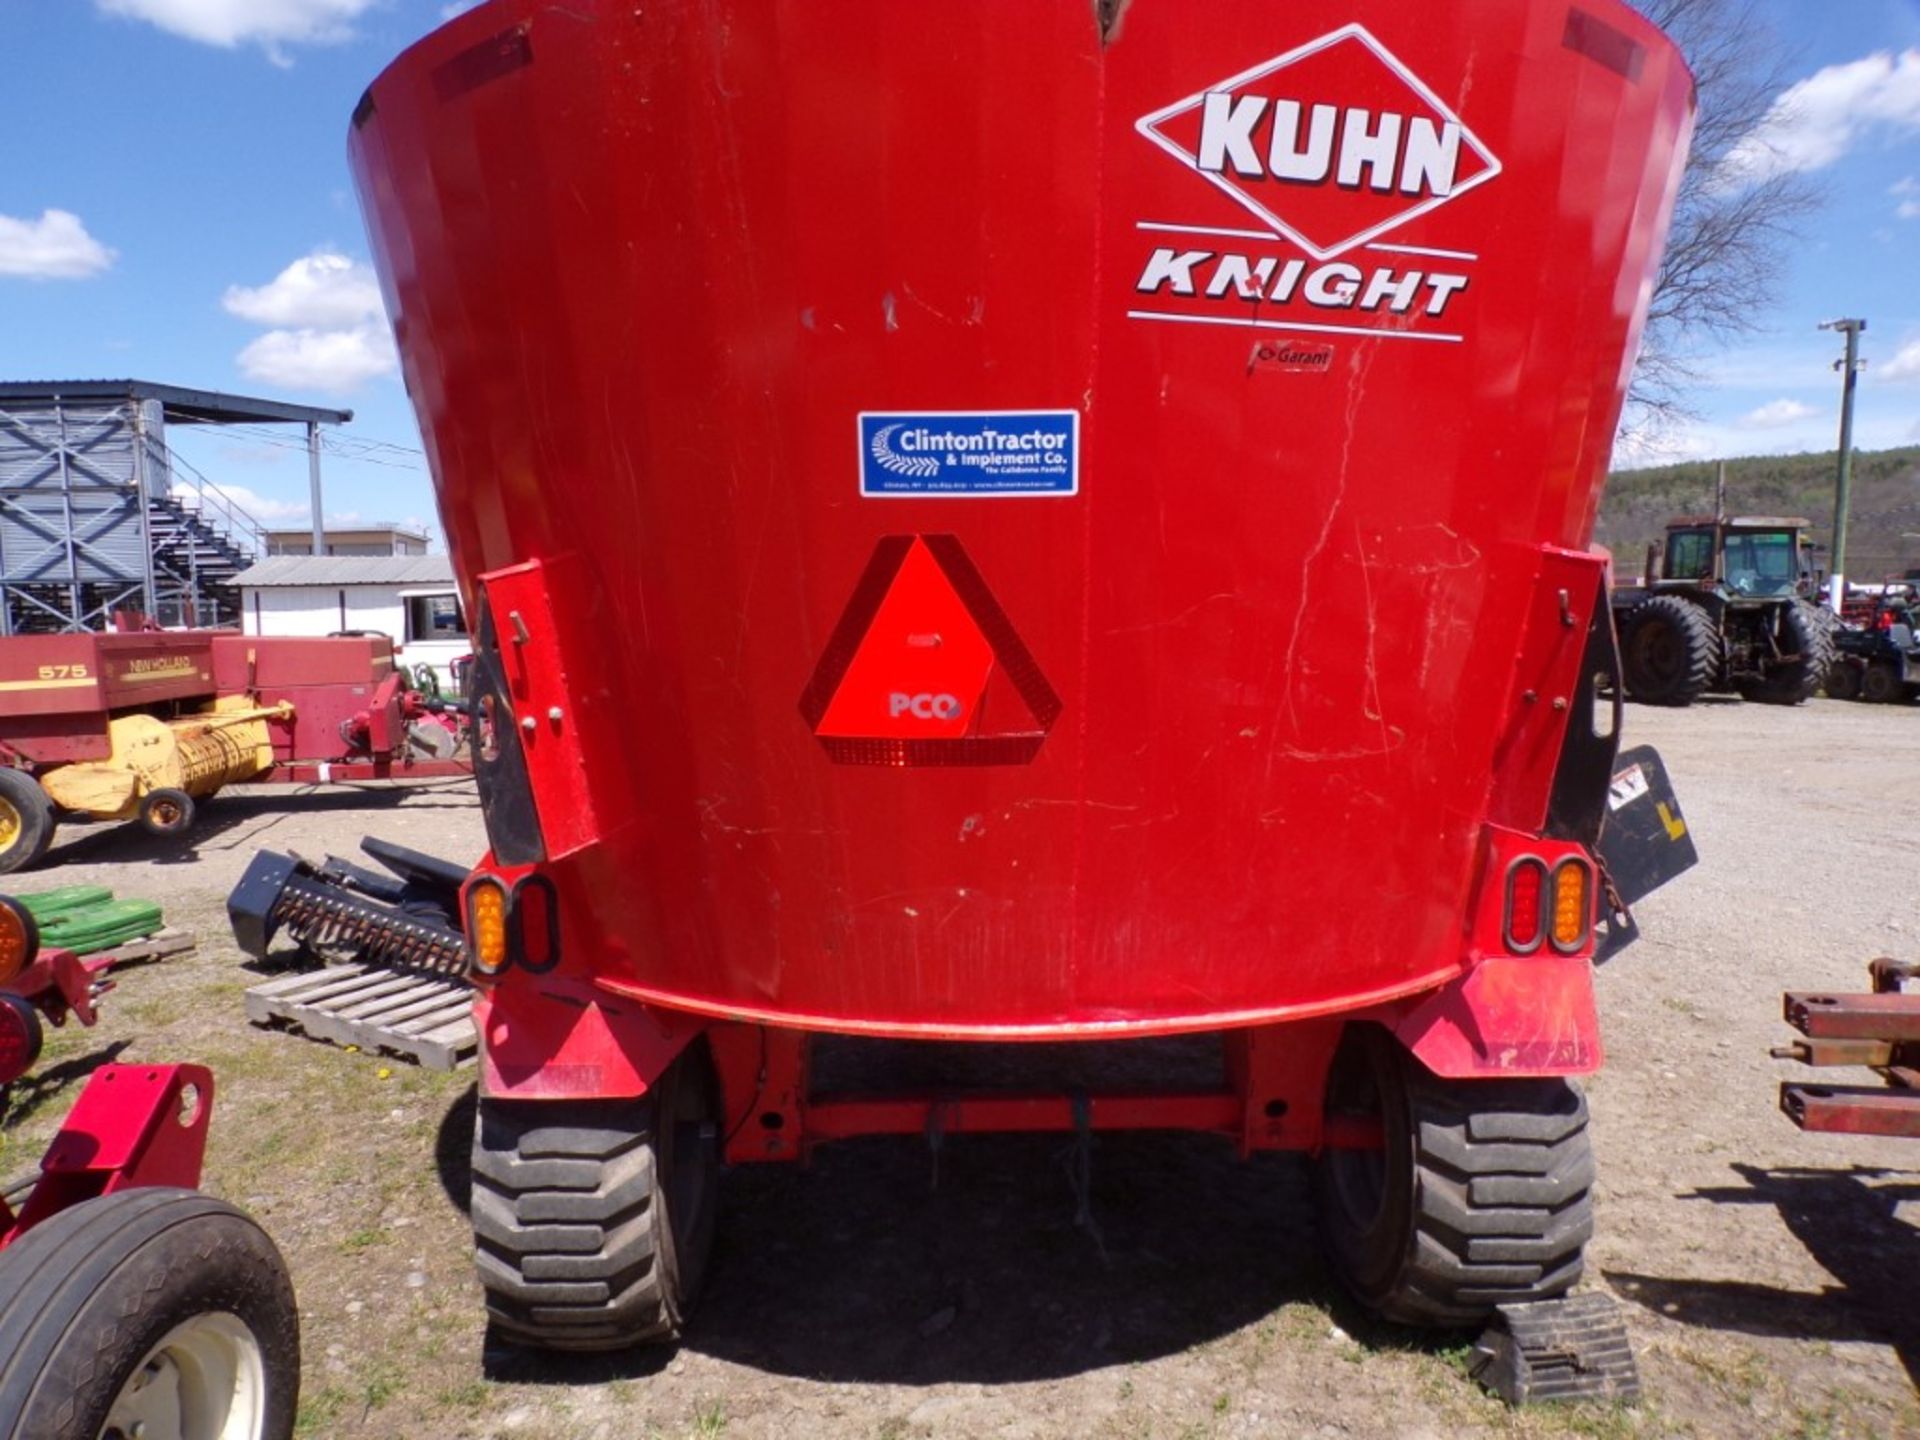 Kuhn 5127 Vertical Mixing/Feeder Wagon - Like New, Never Came w/Scales - Super Nice! (4395) - Image 3 of 3